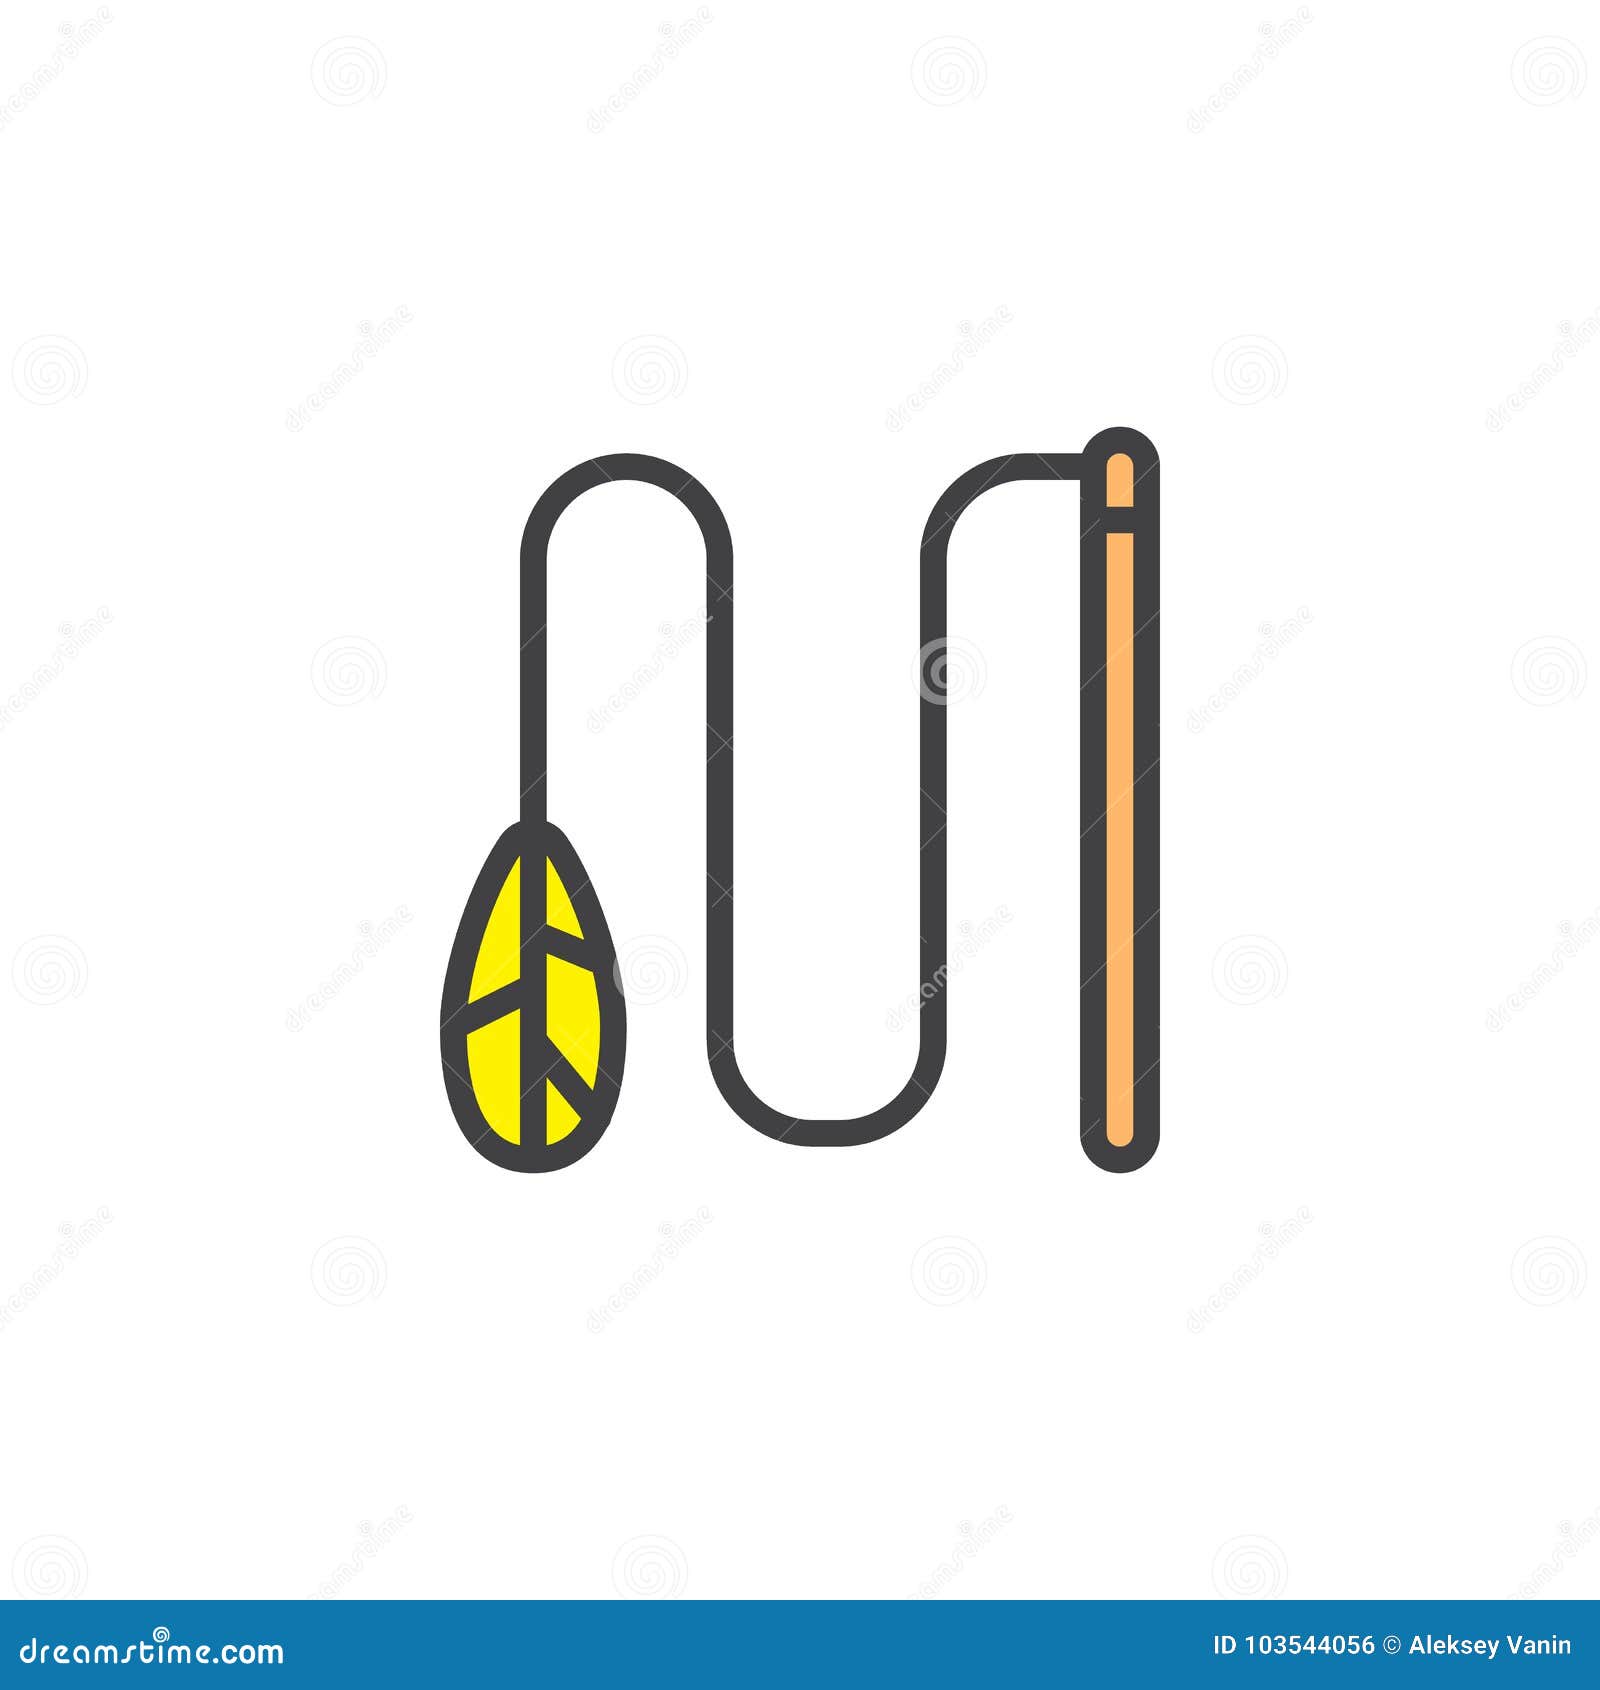 Cat Toy Filled Outline Icon Stock Vector - Illustration of linear